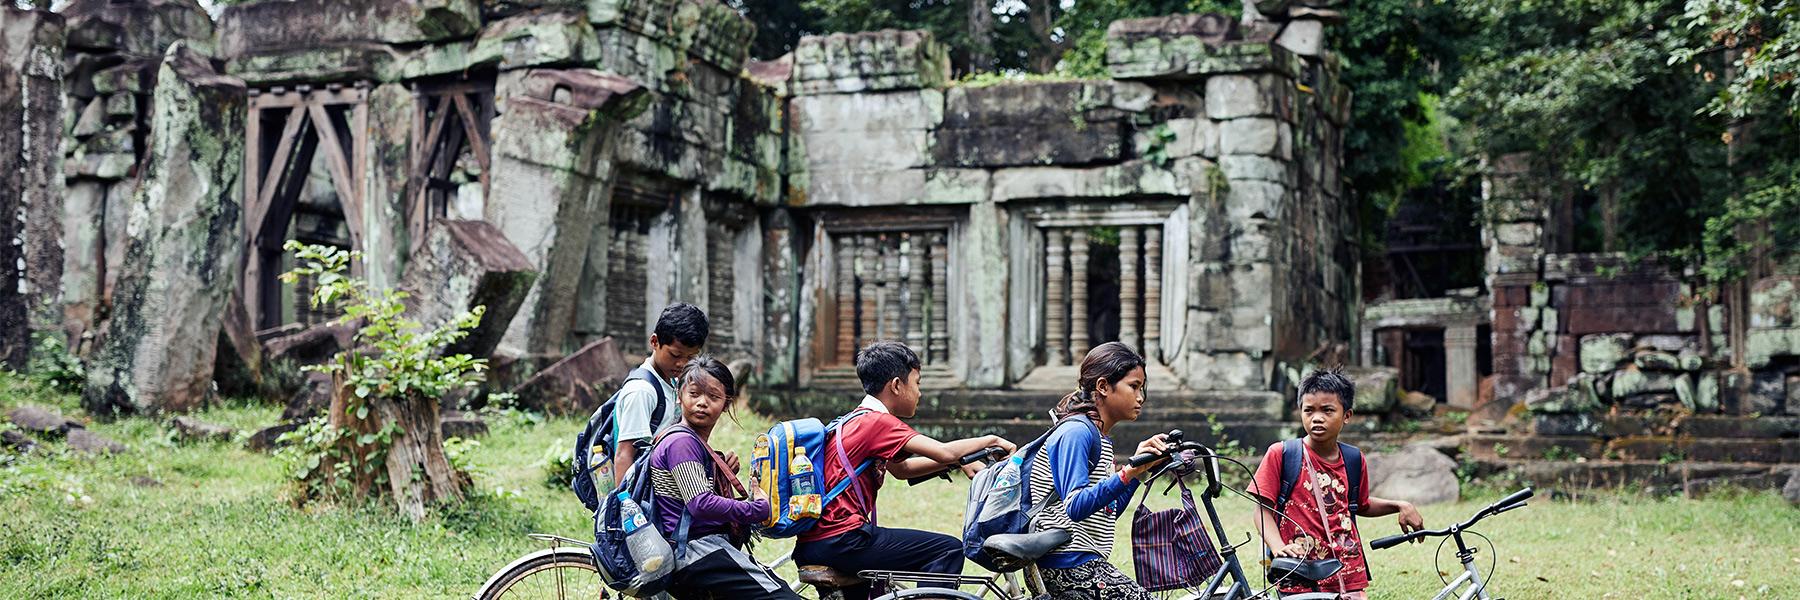 Why Visit The Remote Khmer Temples?